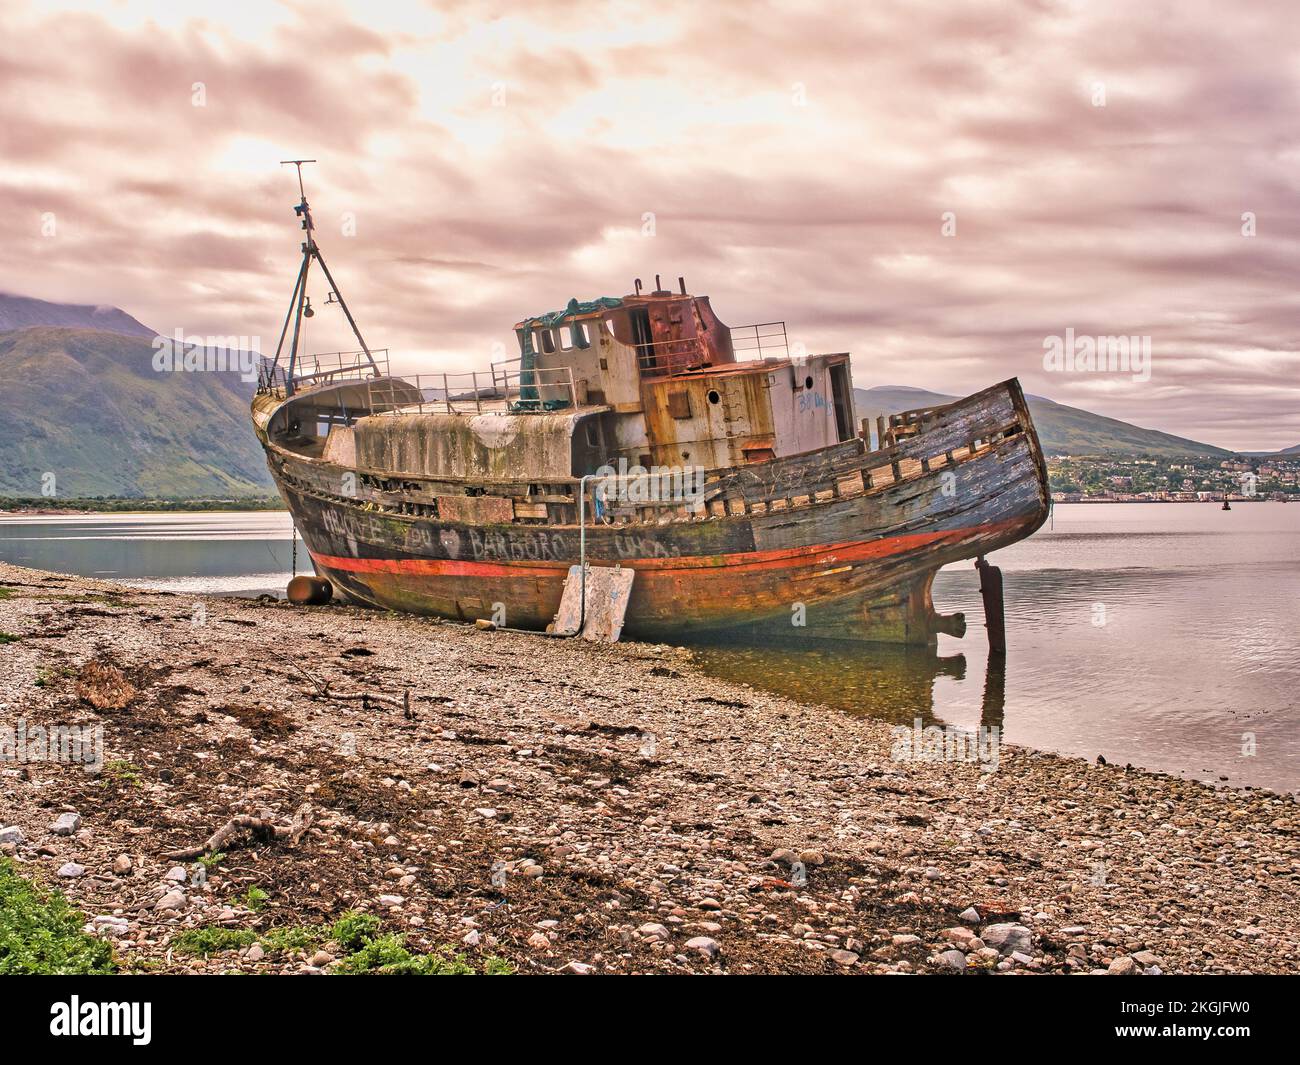 Trawler wrecked on shore of Fort William Stock Photo